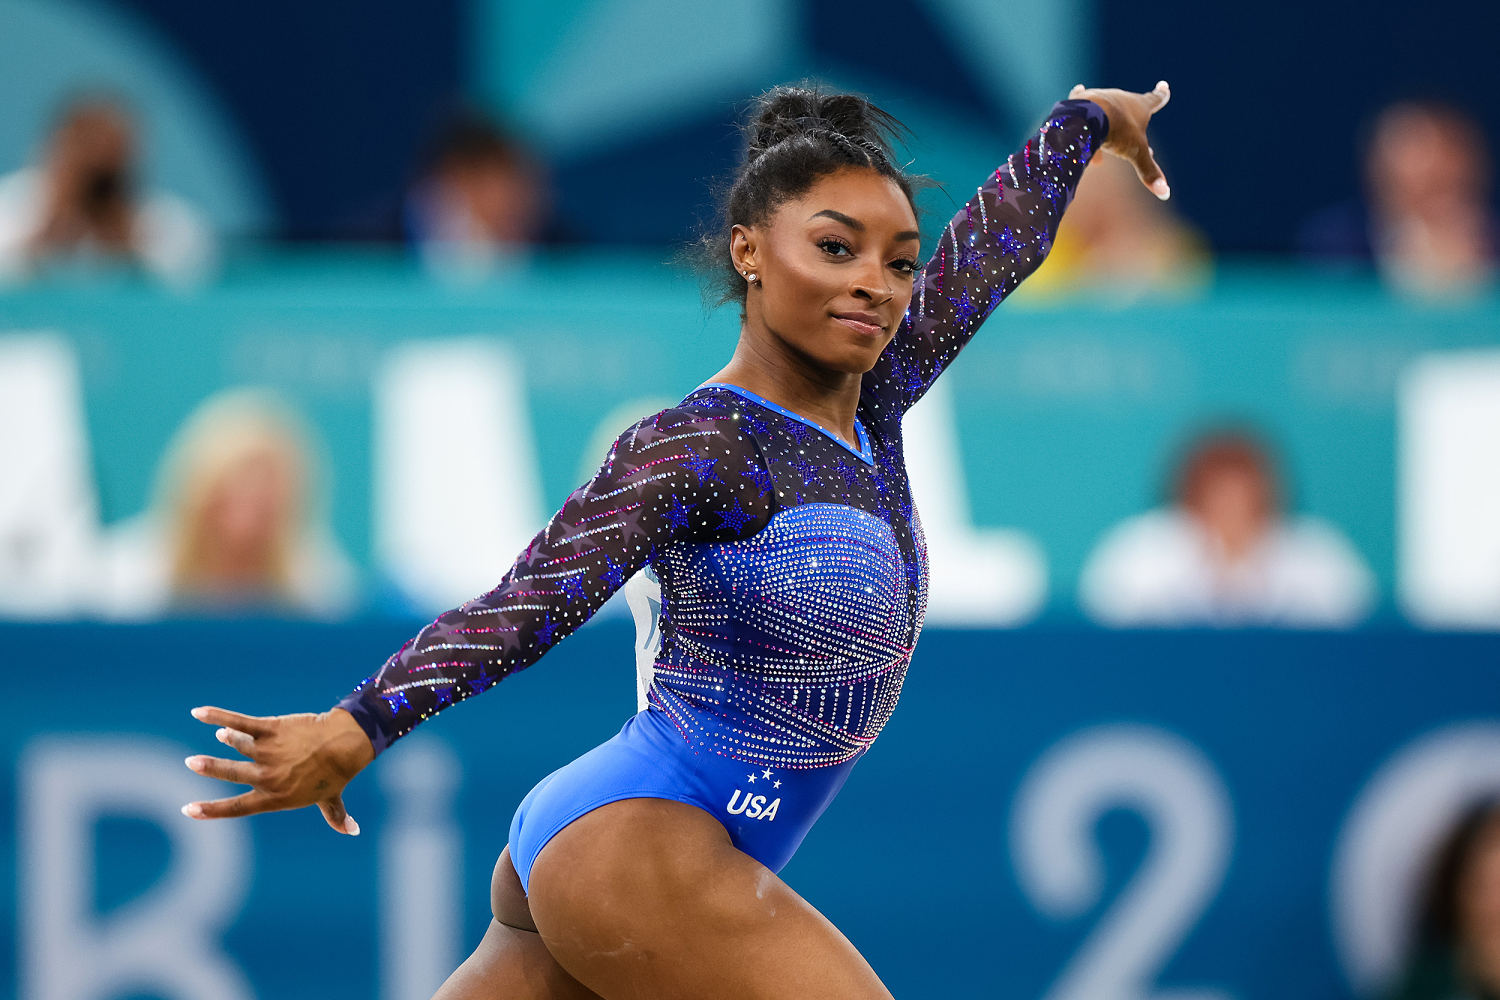 Simone Biles didn't finish with gold, but the Paris Games still belonged to her